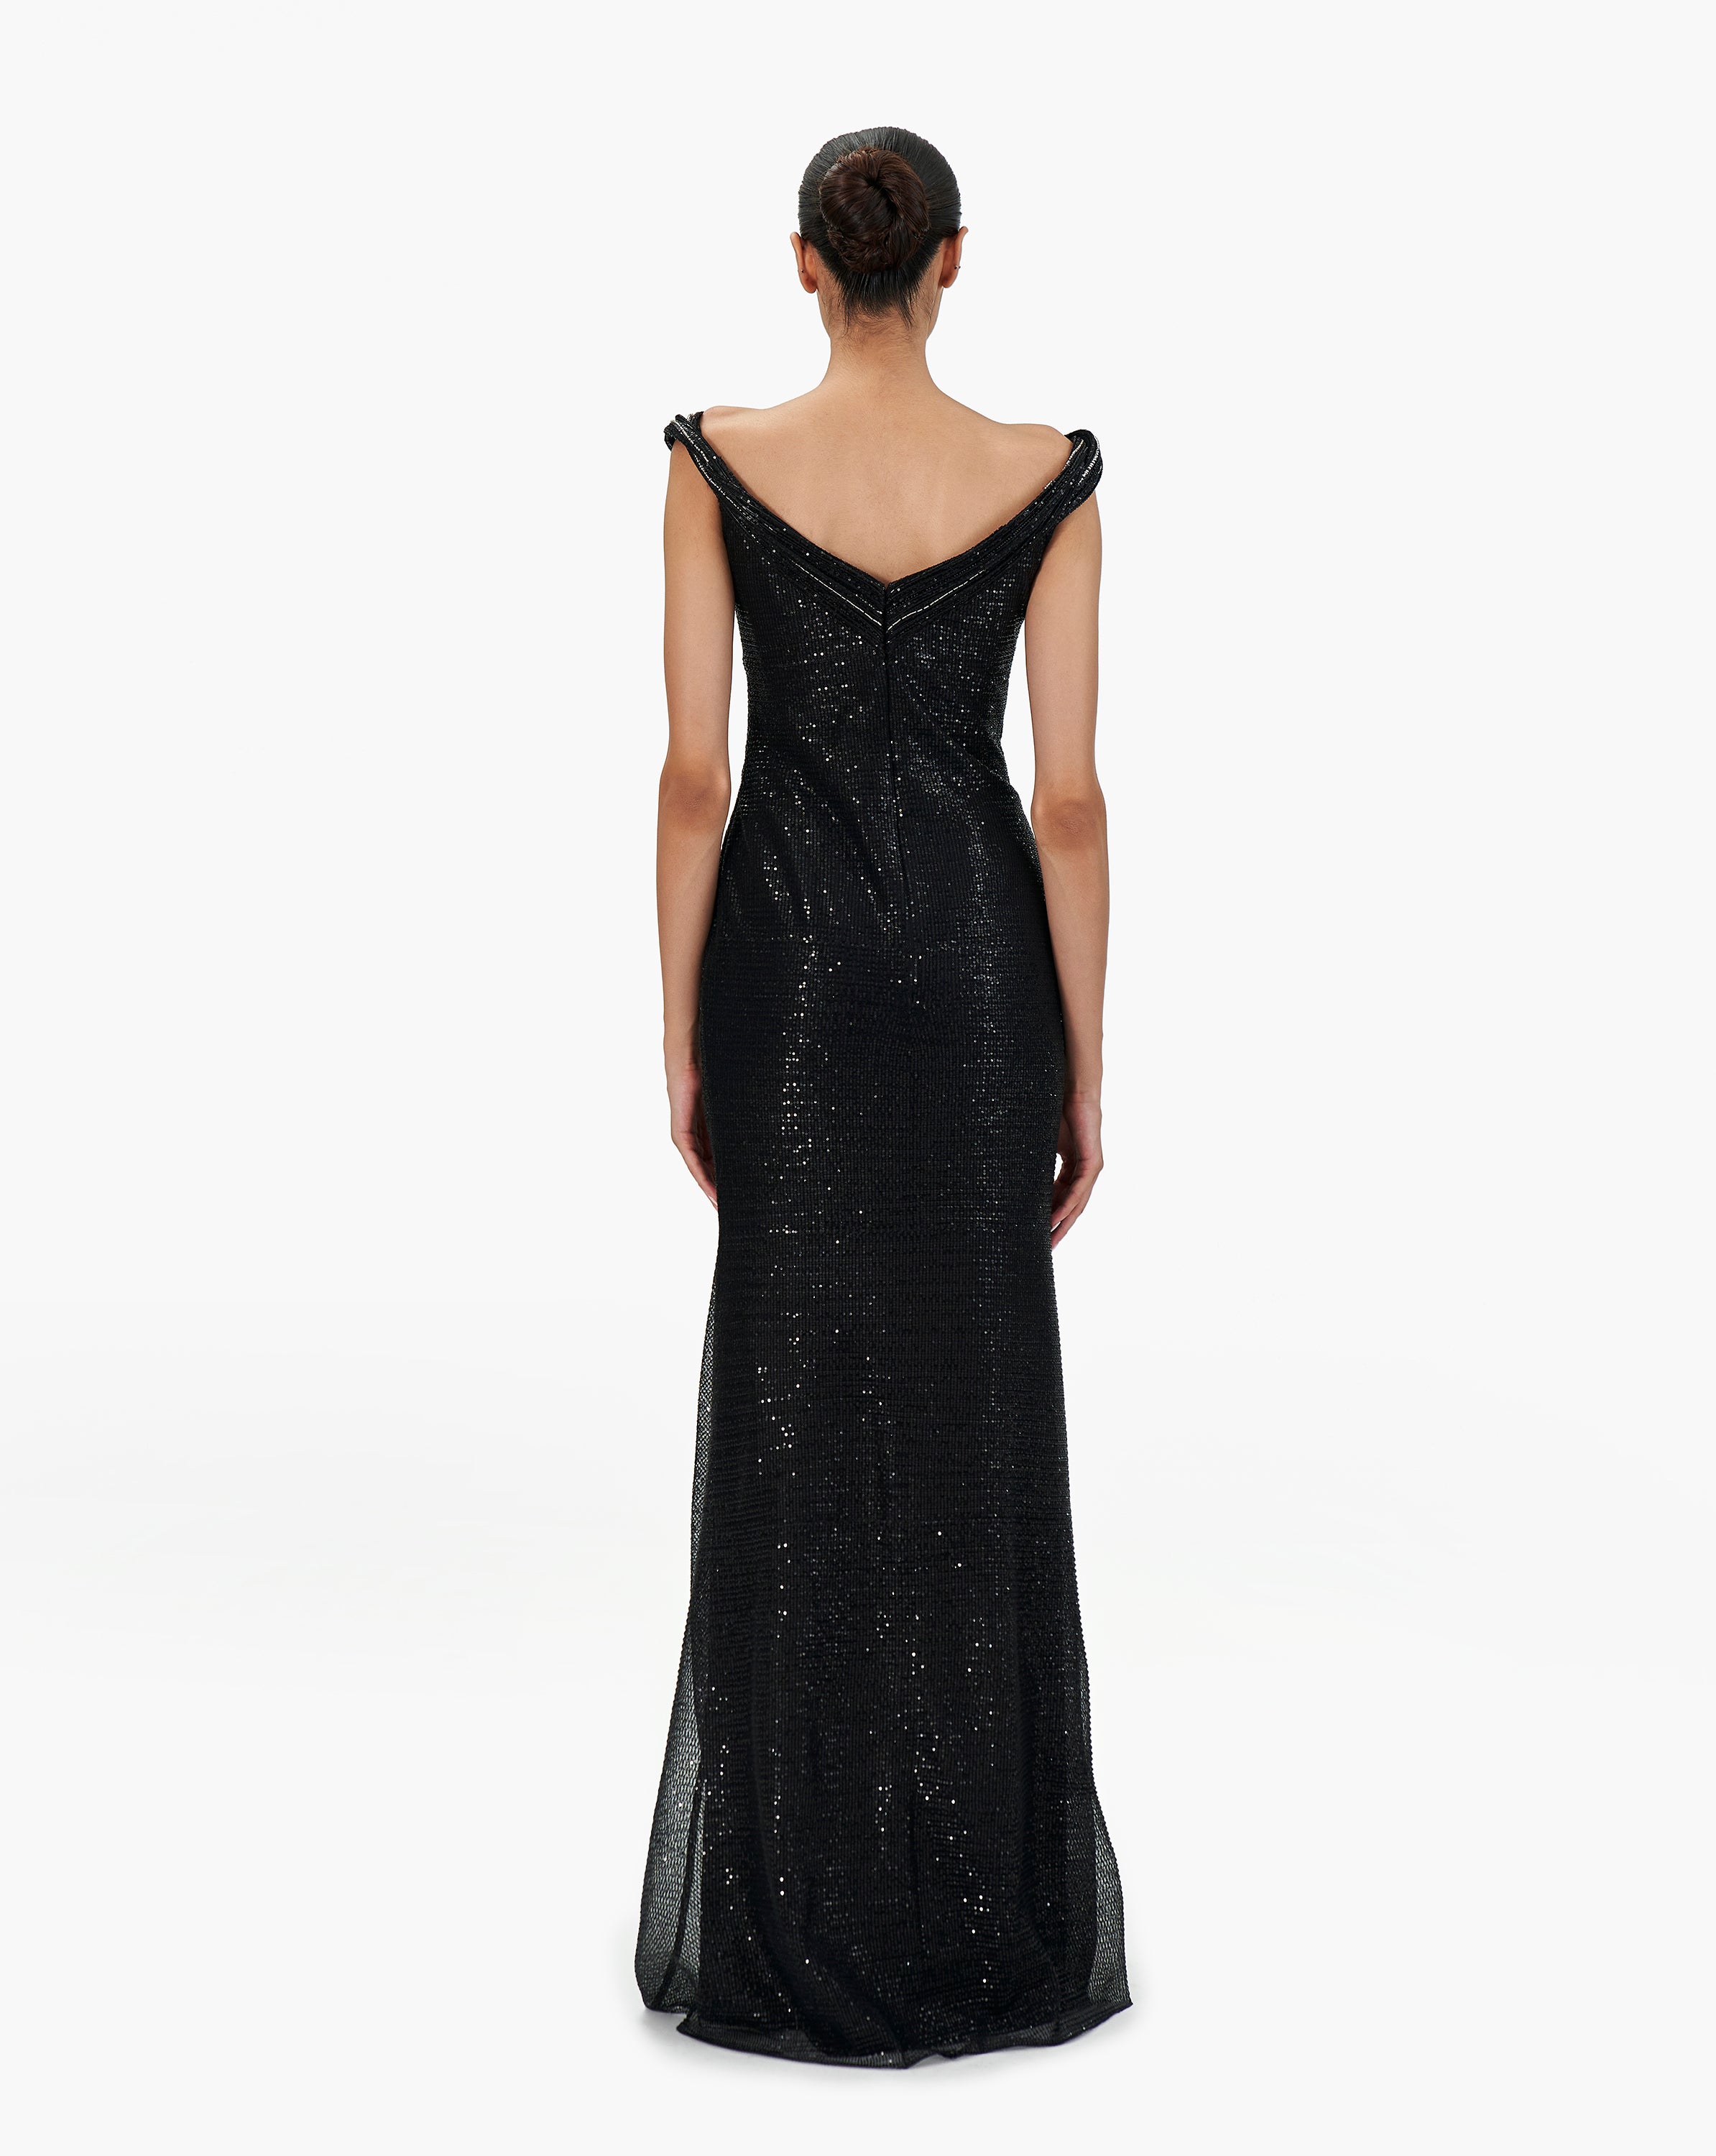 Daisy Shimmer Gown by Needle & Thread | Black prom dress, Black prom, Prom  dresses